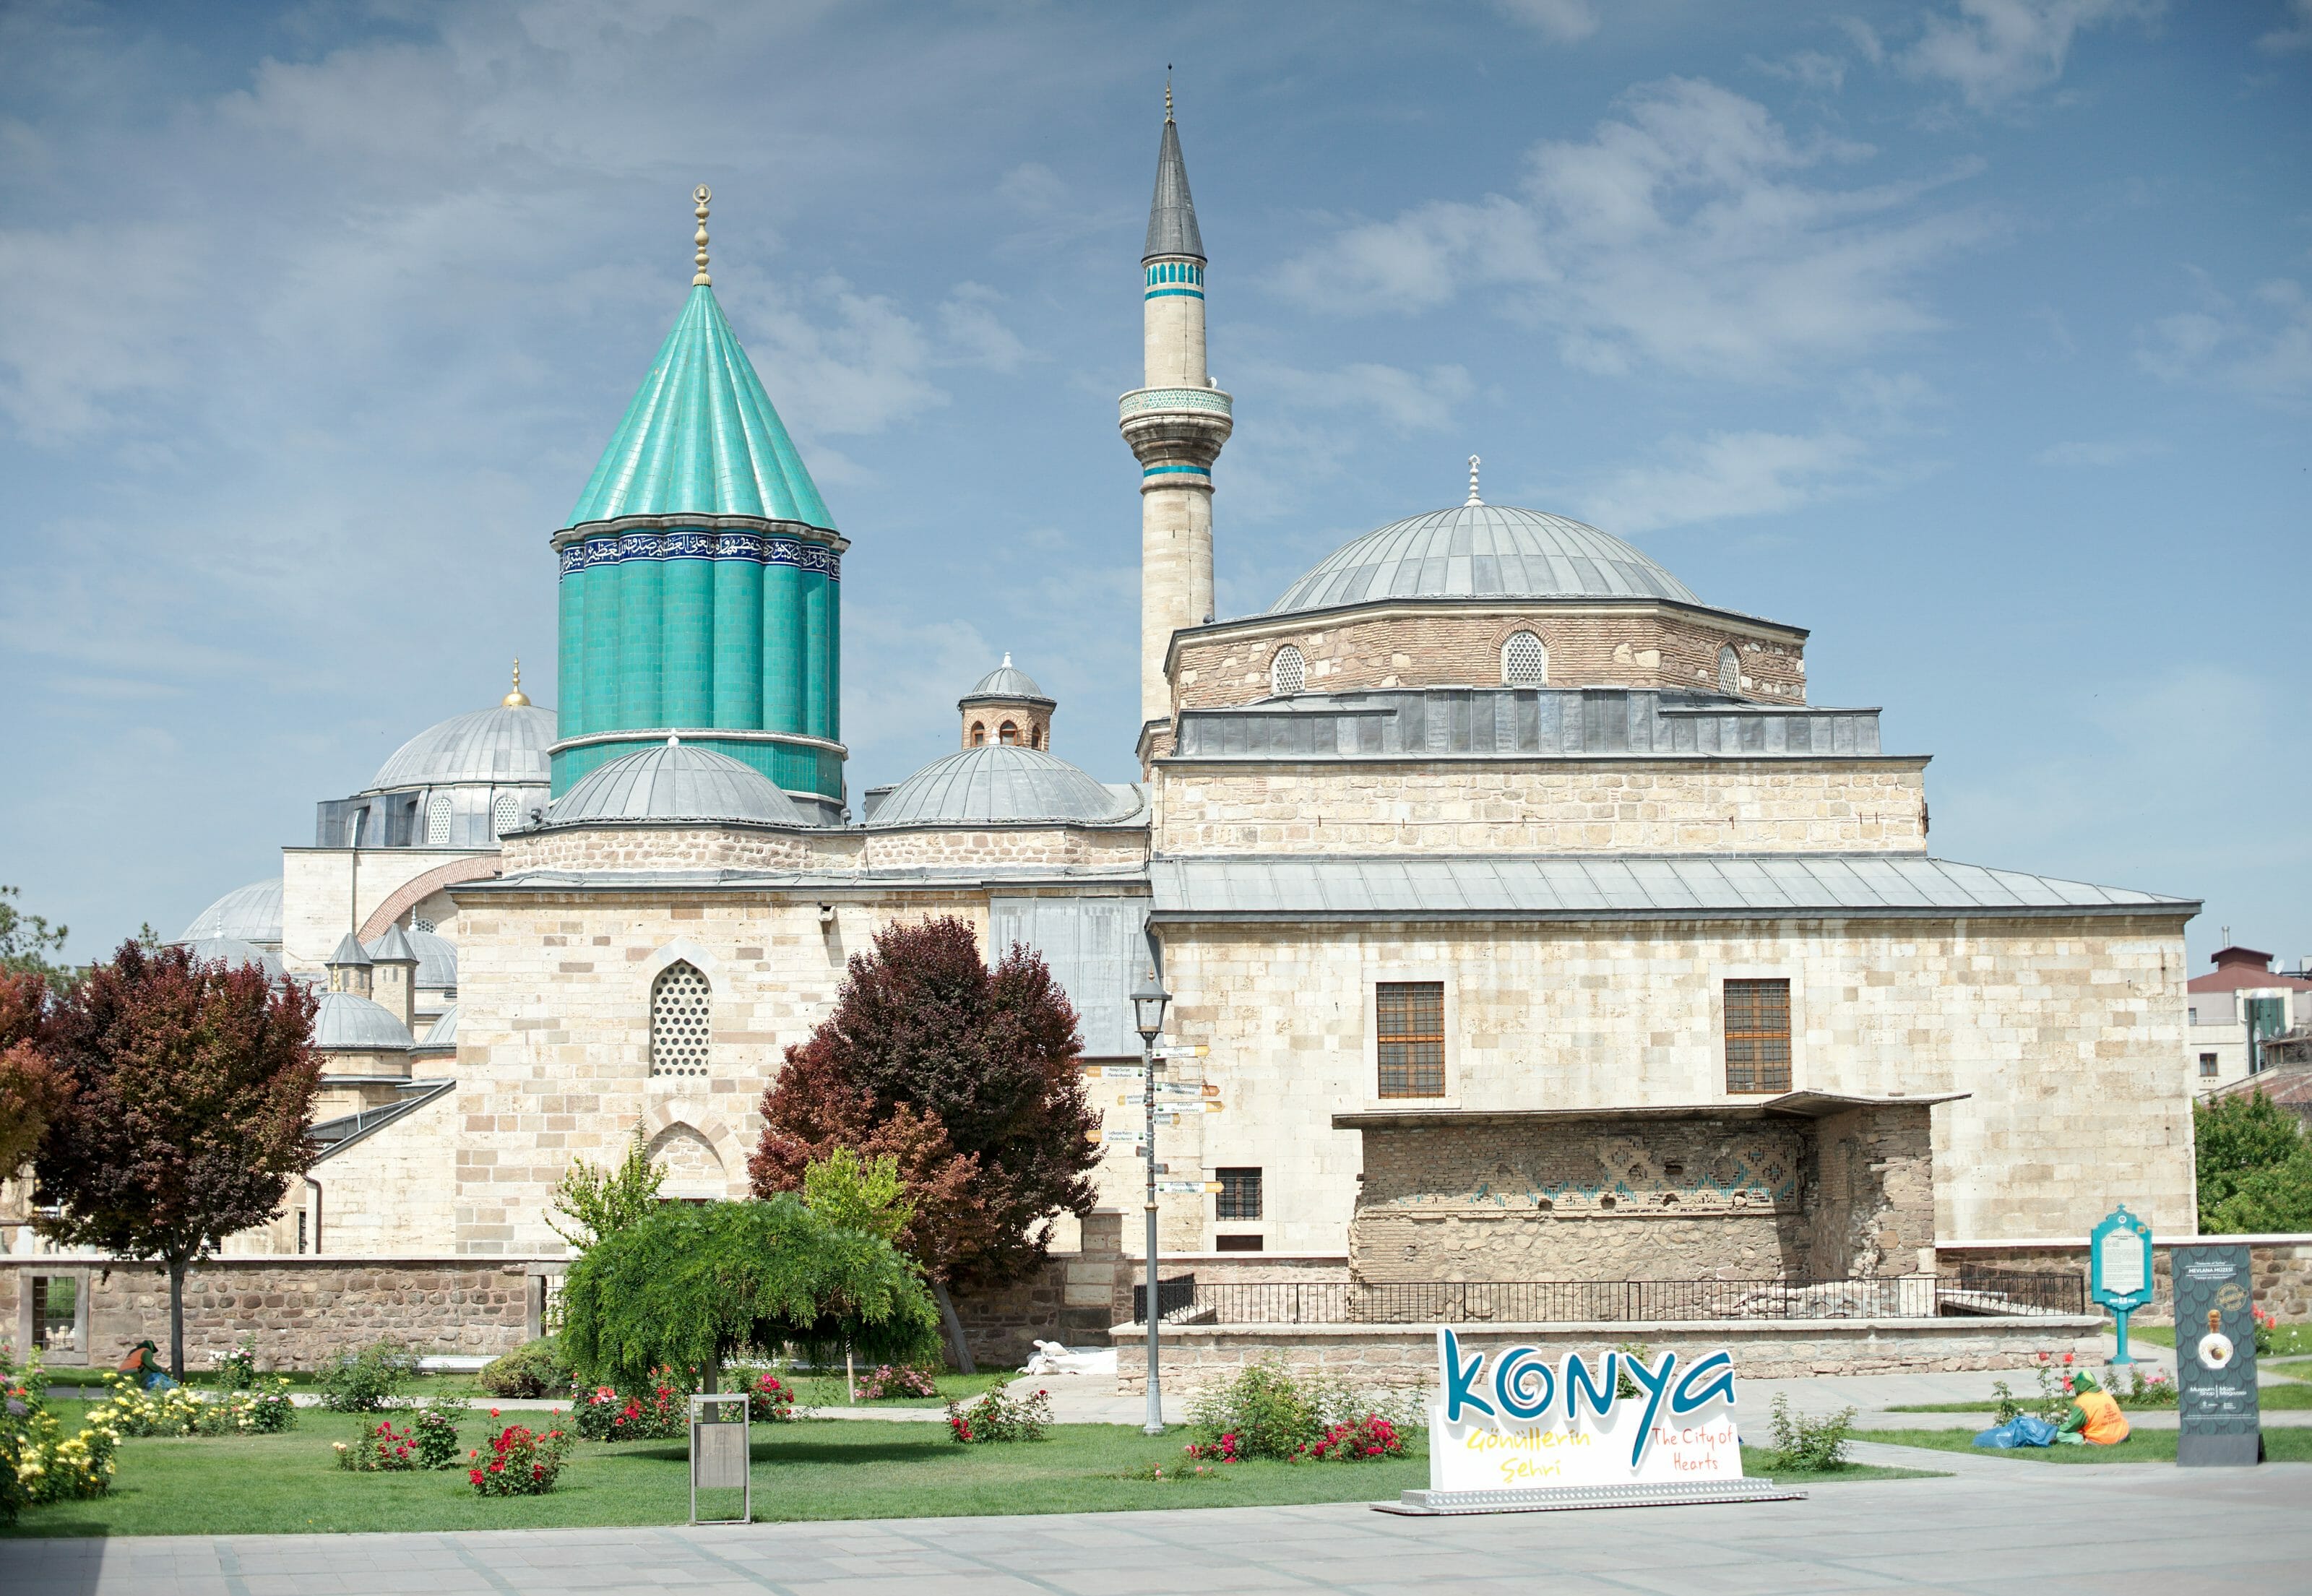 Things To Do In Konya And In Sille The Traditional Part Of Turkey